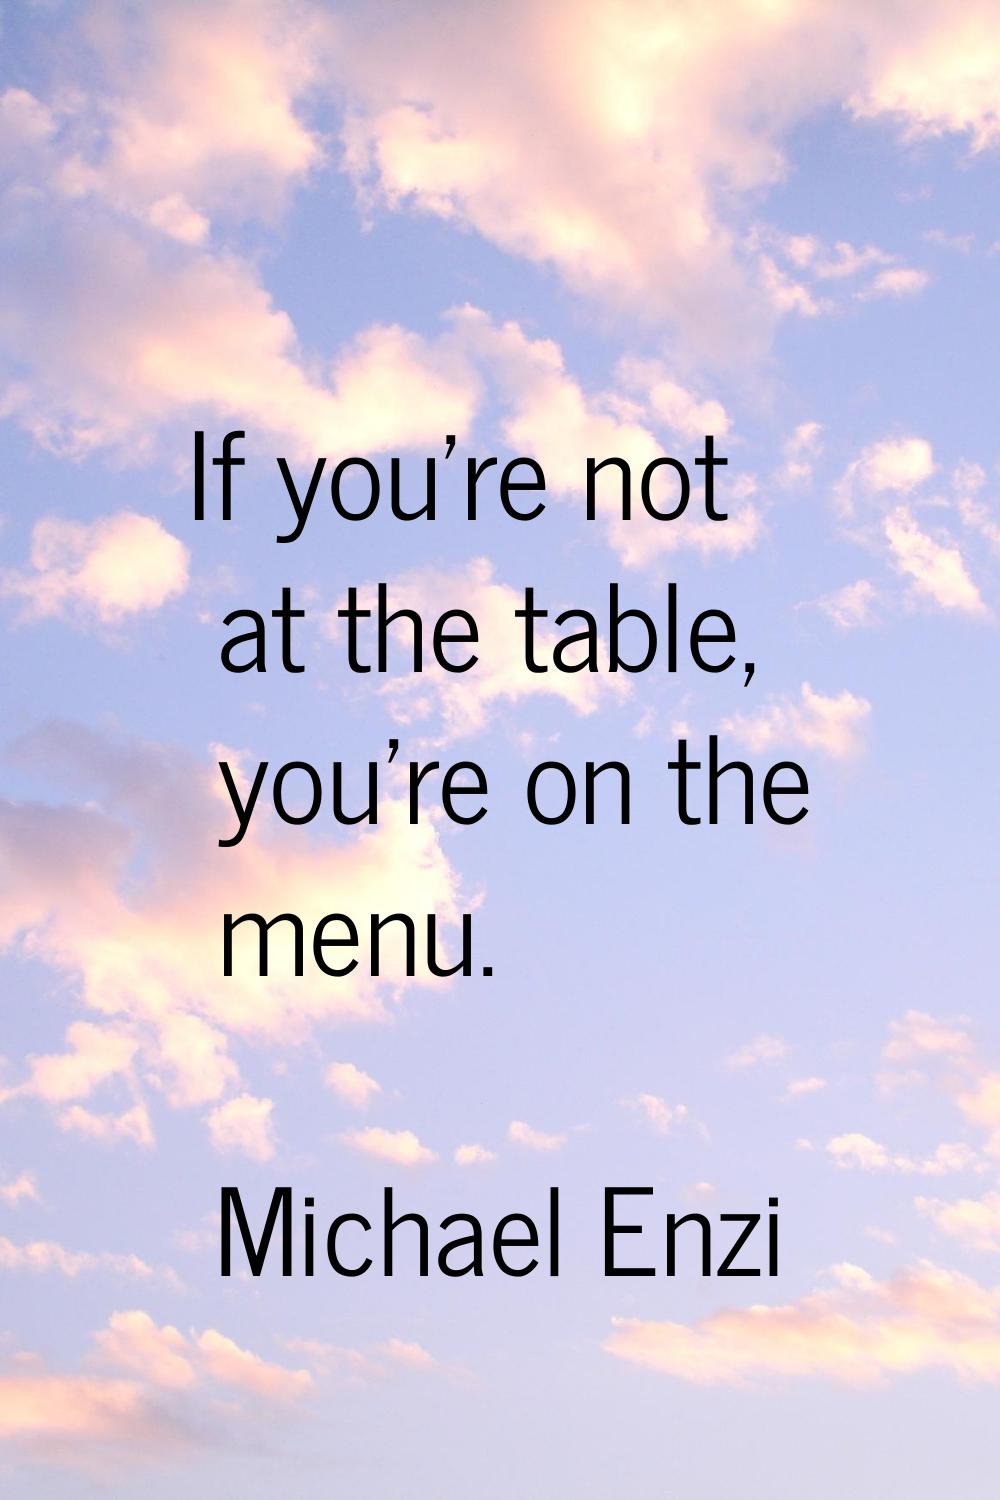 If you're not at the table, you're on the menu.